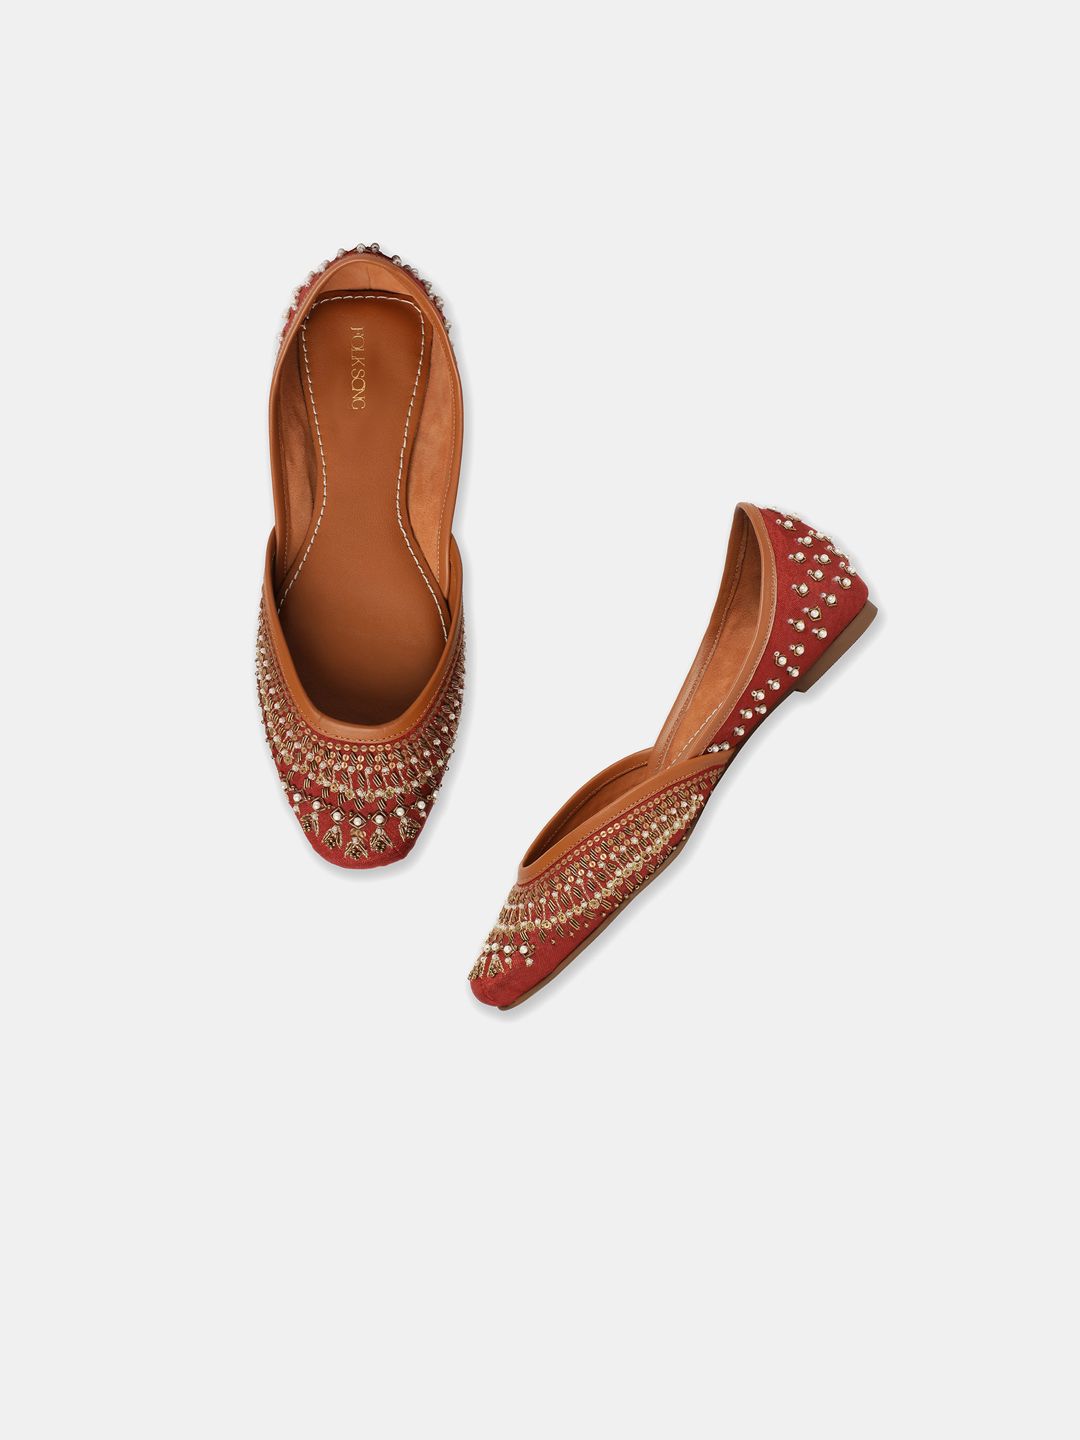 W The Folksong Collection Women Orange Ethnic Ballerinas Flats Price in India